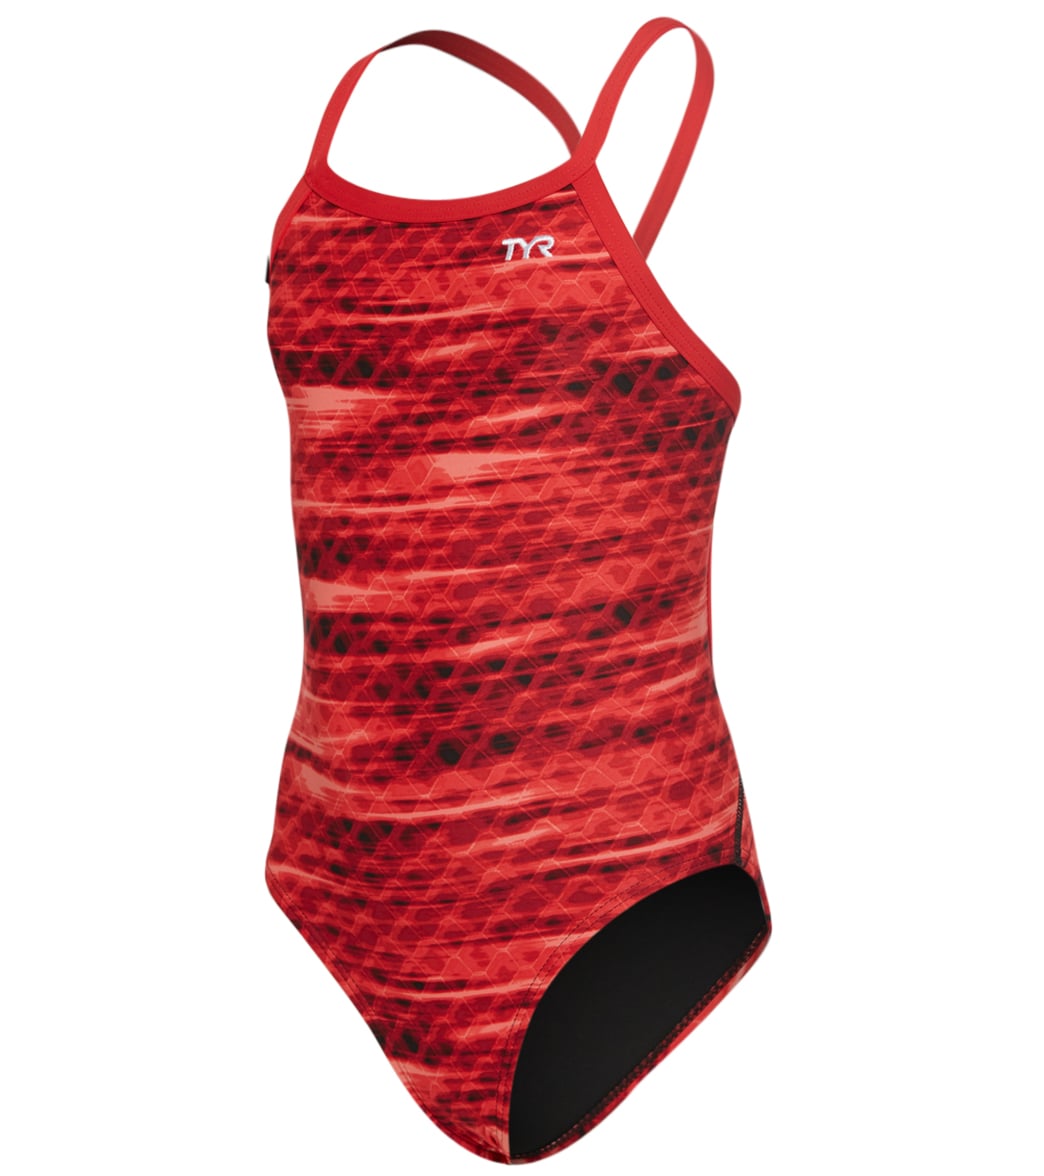 TYR Girls' Castaway Diamondfit One Piece Swimsuit - Red 22 - Swimoutlet.com